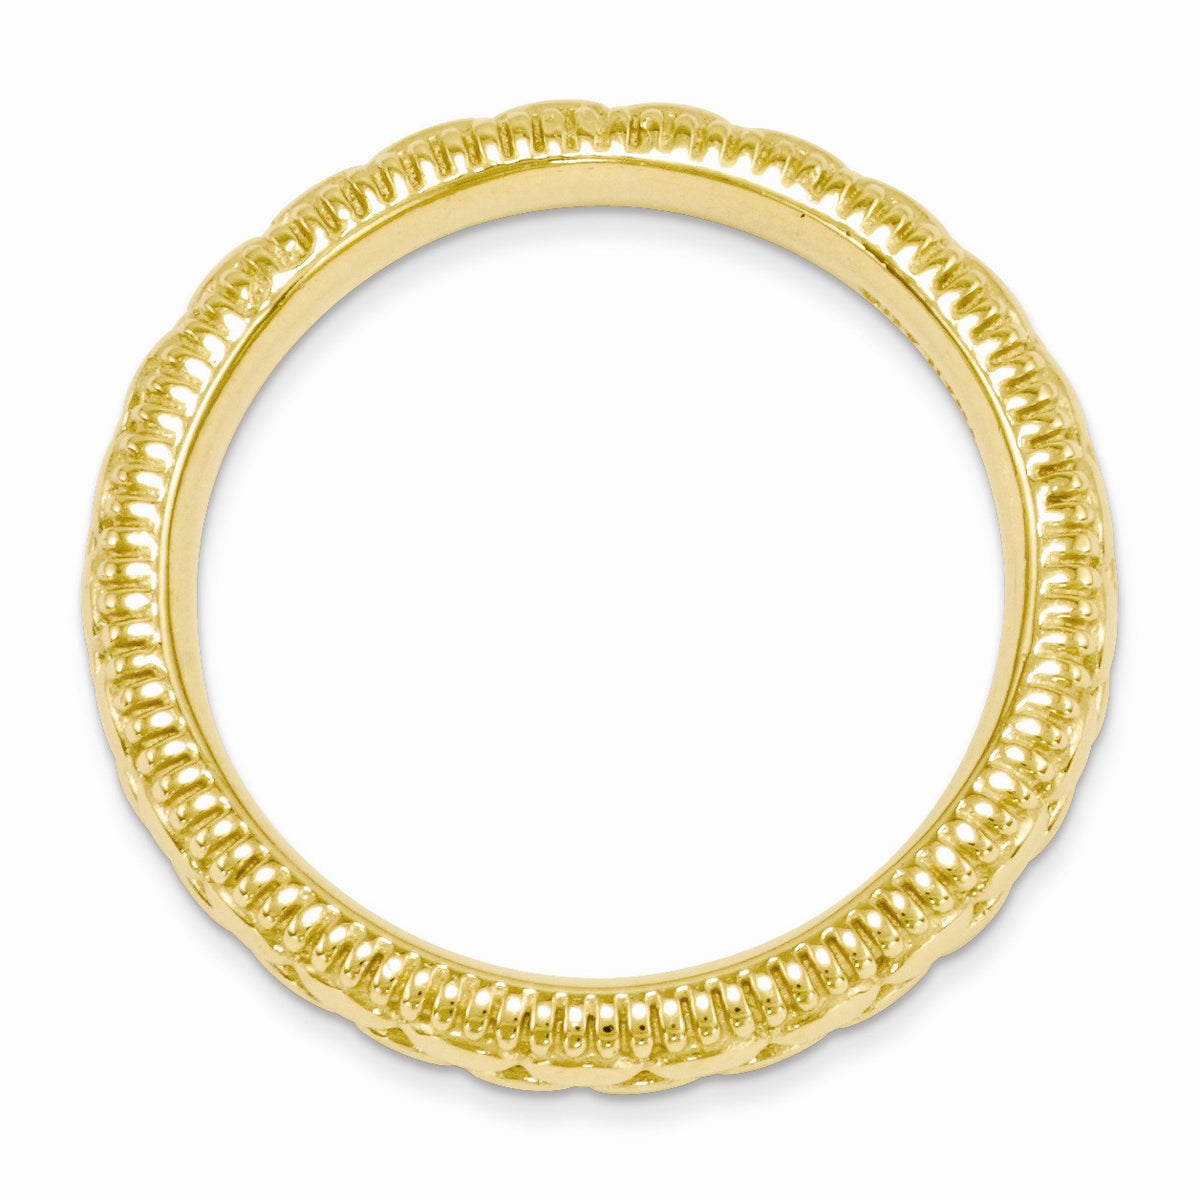 Alternate view of the 3.5mm 14k Yellow Gold Plated Sterling Silver Stackable Patterned Band by The Black Bow Jewelry Co.